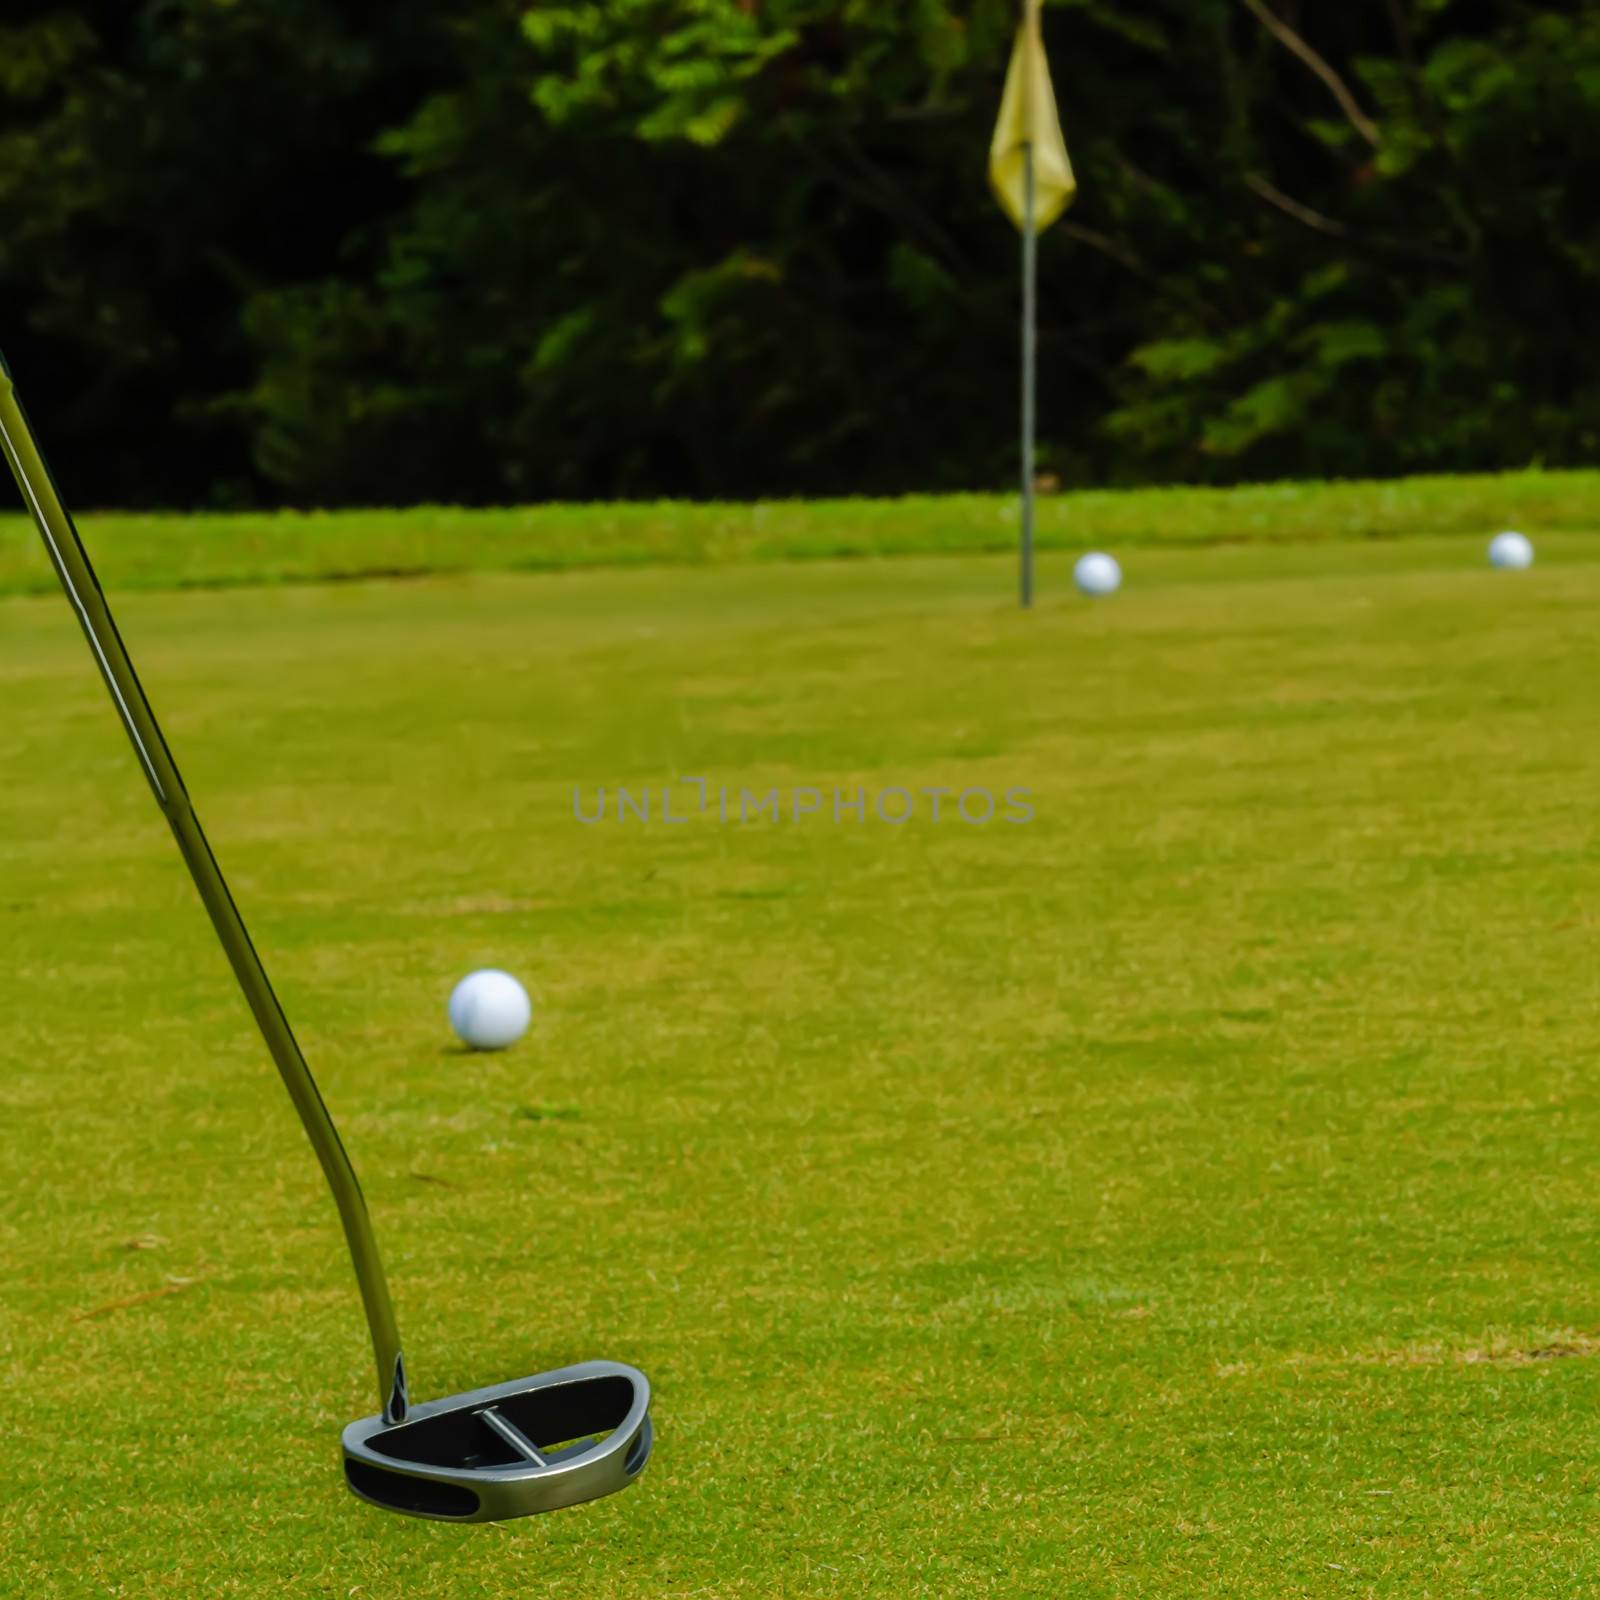 Golf ball on a green, in front of the hole, by digidreamgrafix